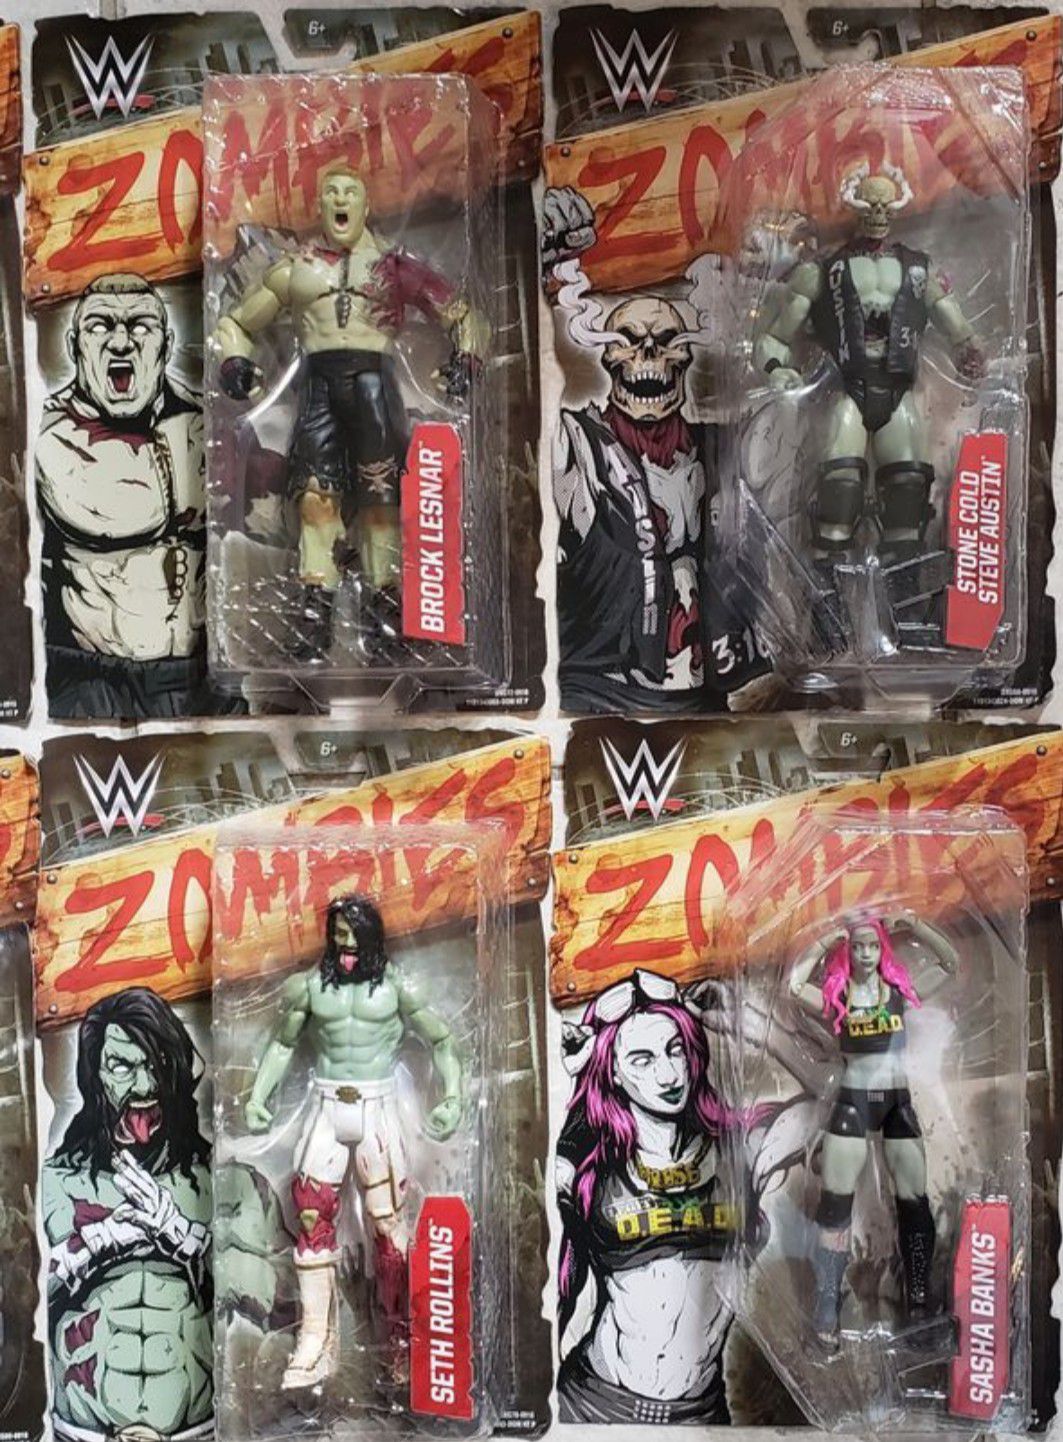 New WWE Zombies Full Set Series 2 Action Figures.